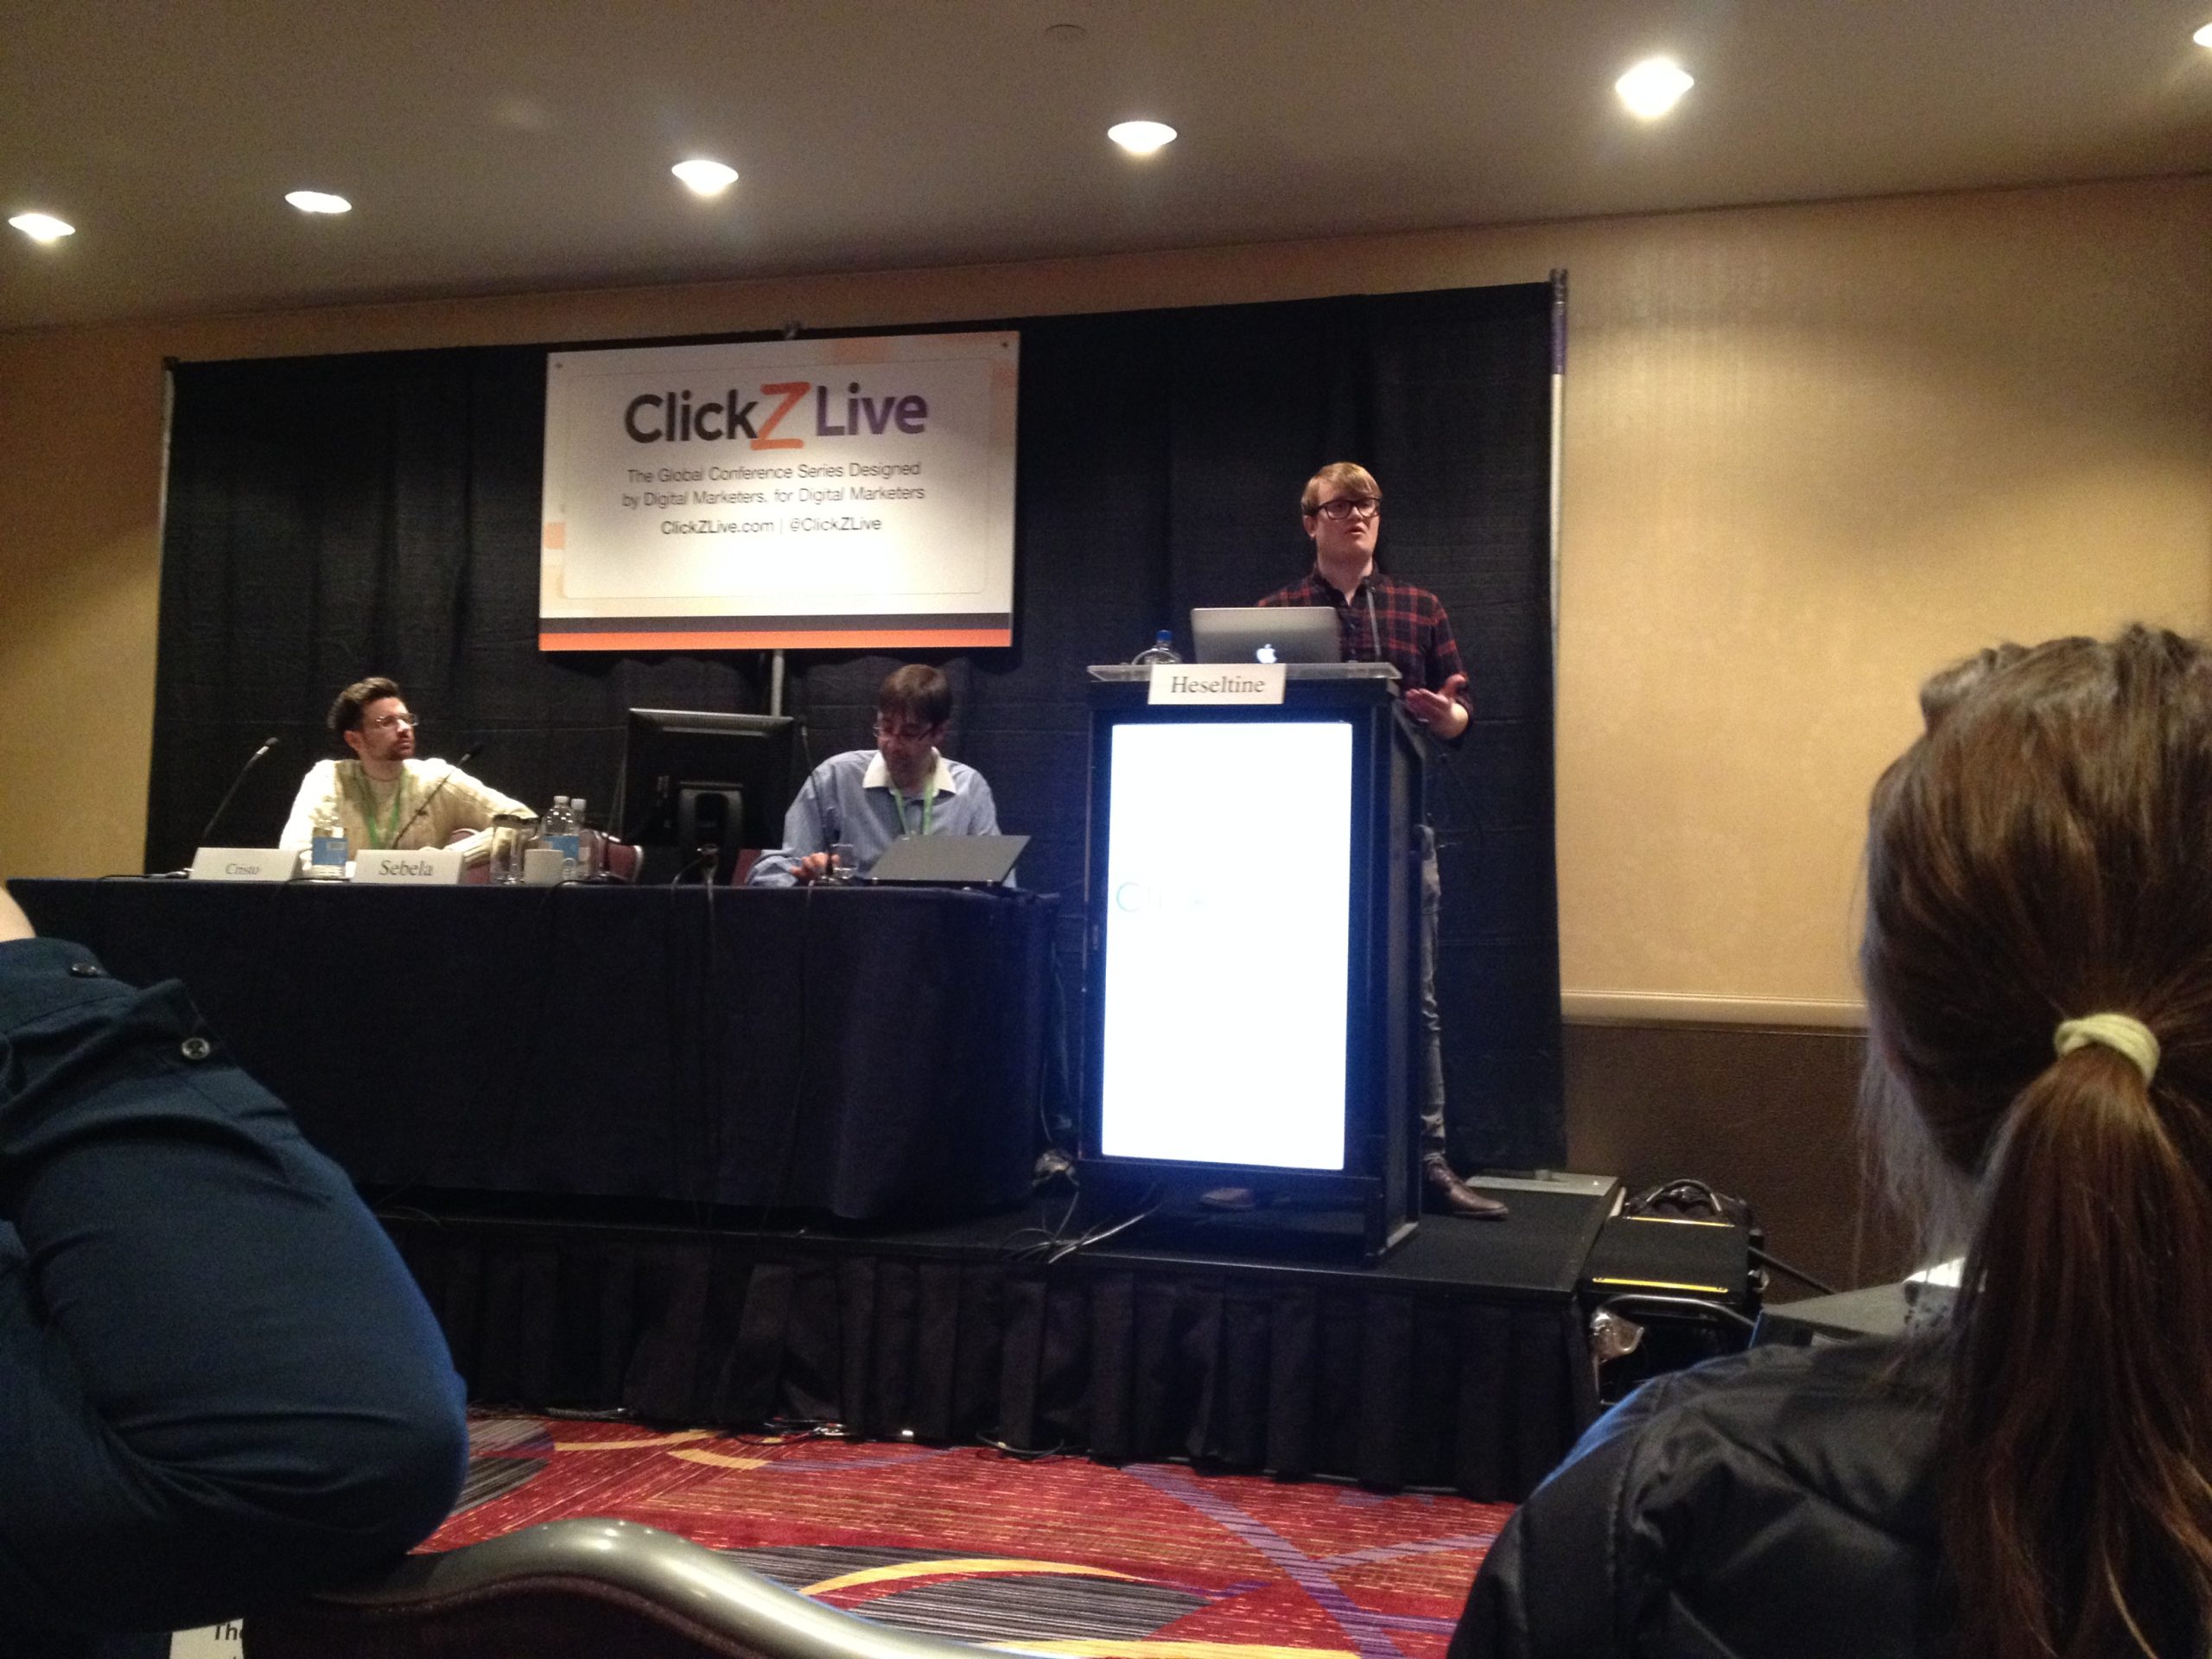 ClickZ Live NY experts talk about how to blog better